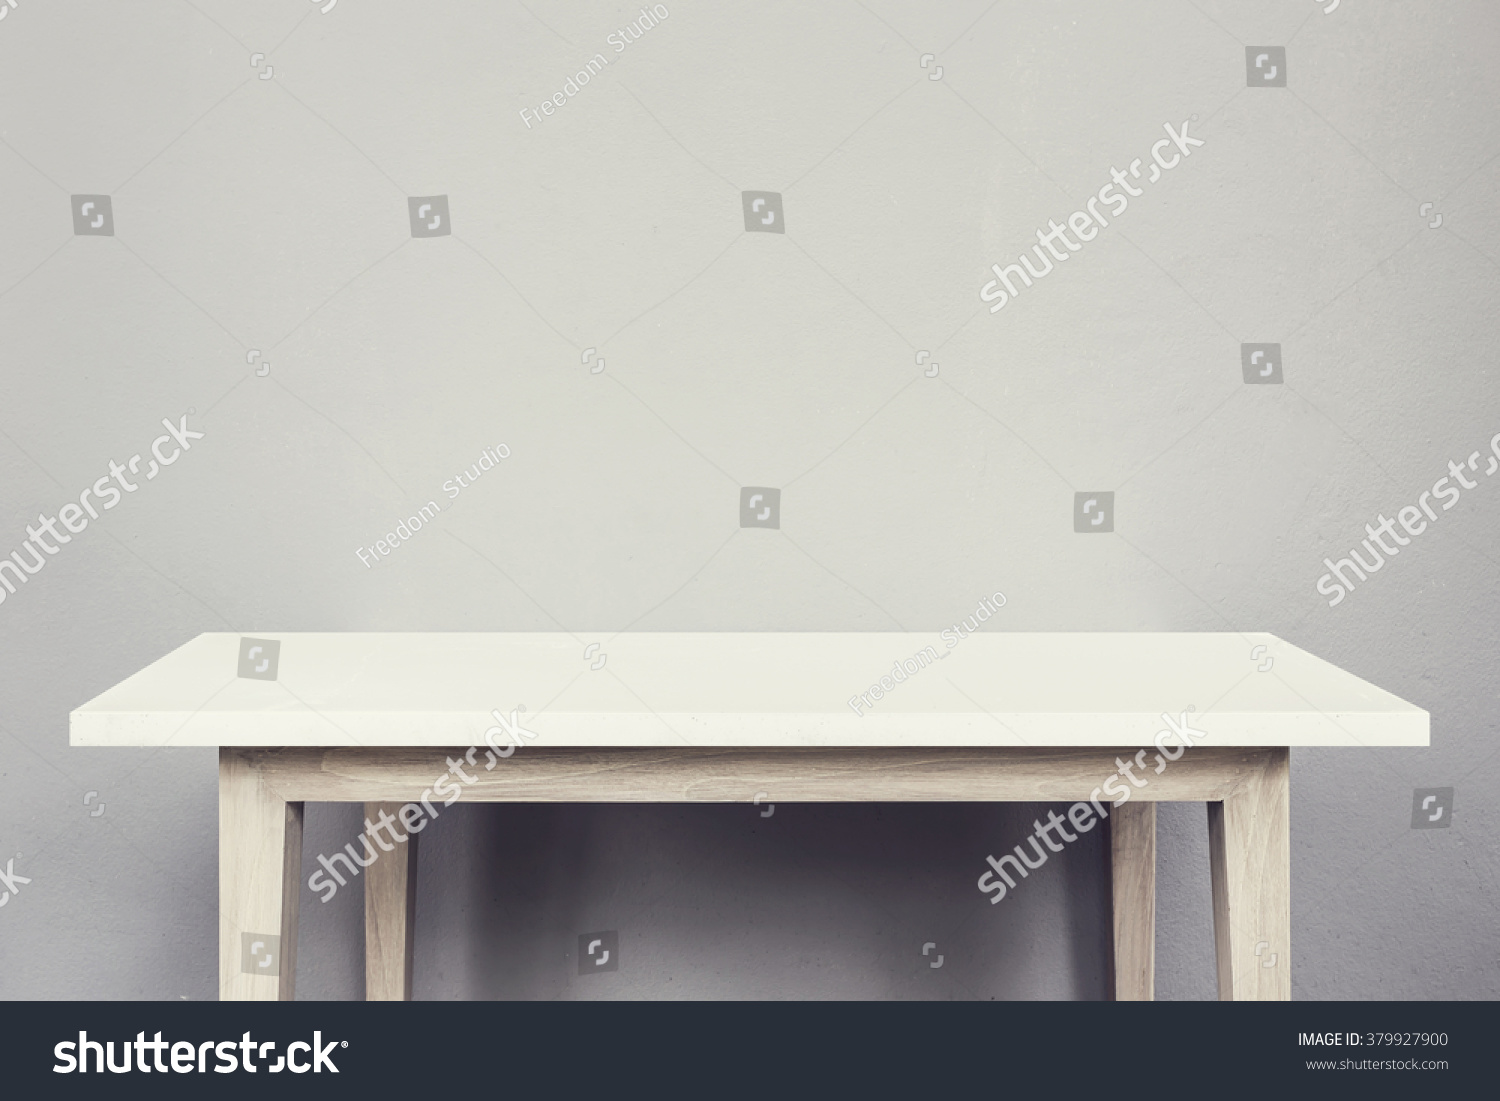 Empty top of natural stone table and grey wall background. For product display  #379927900